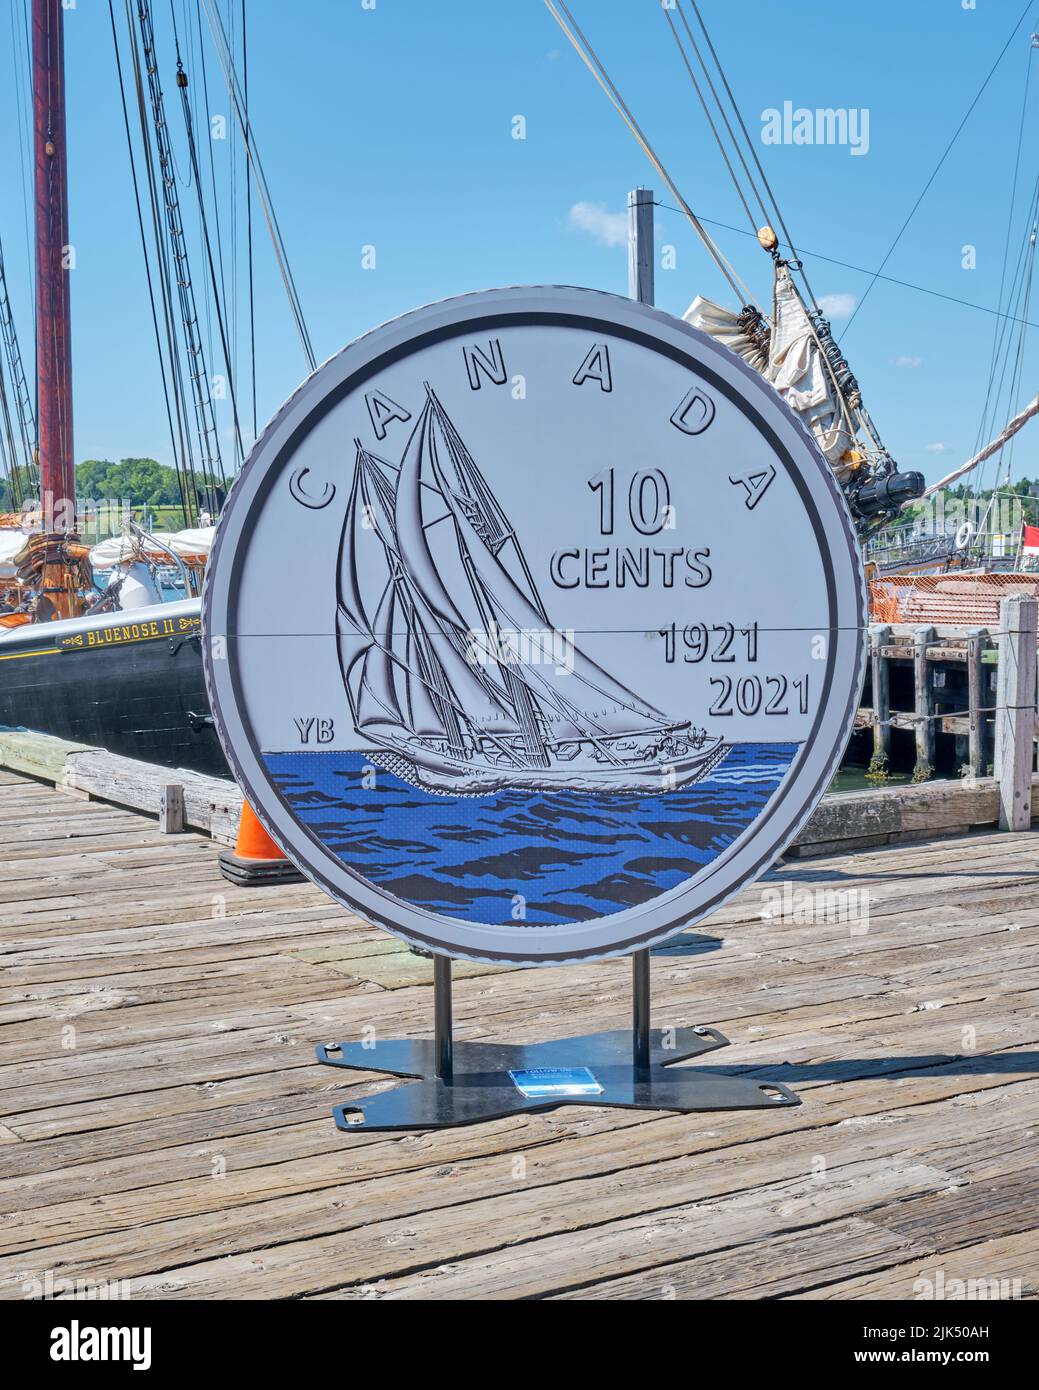 The Bluenose was an fishing and racing schooner that became an iconic symbol of Nova Scotia and Canada.  This larger than life Canadian dime is found Stock Photo